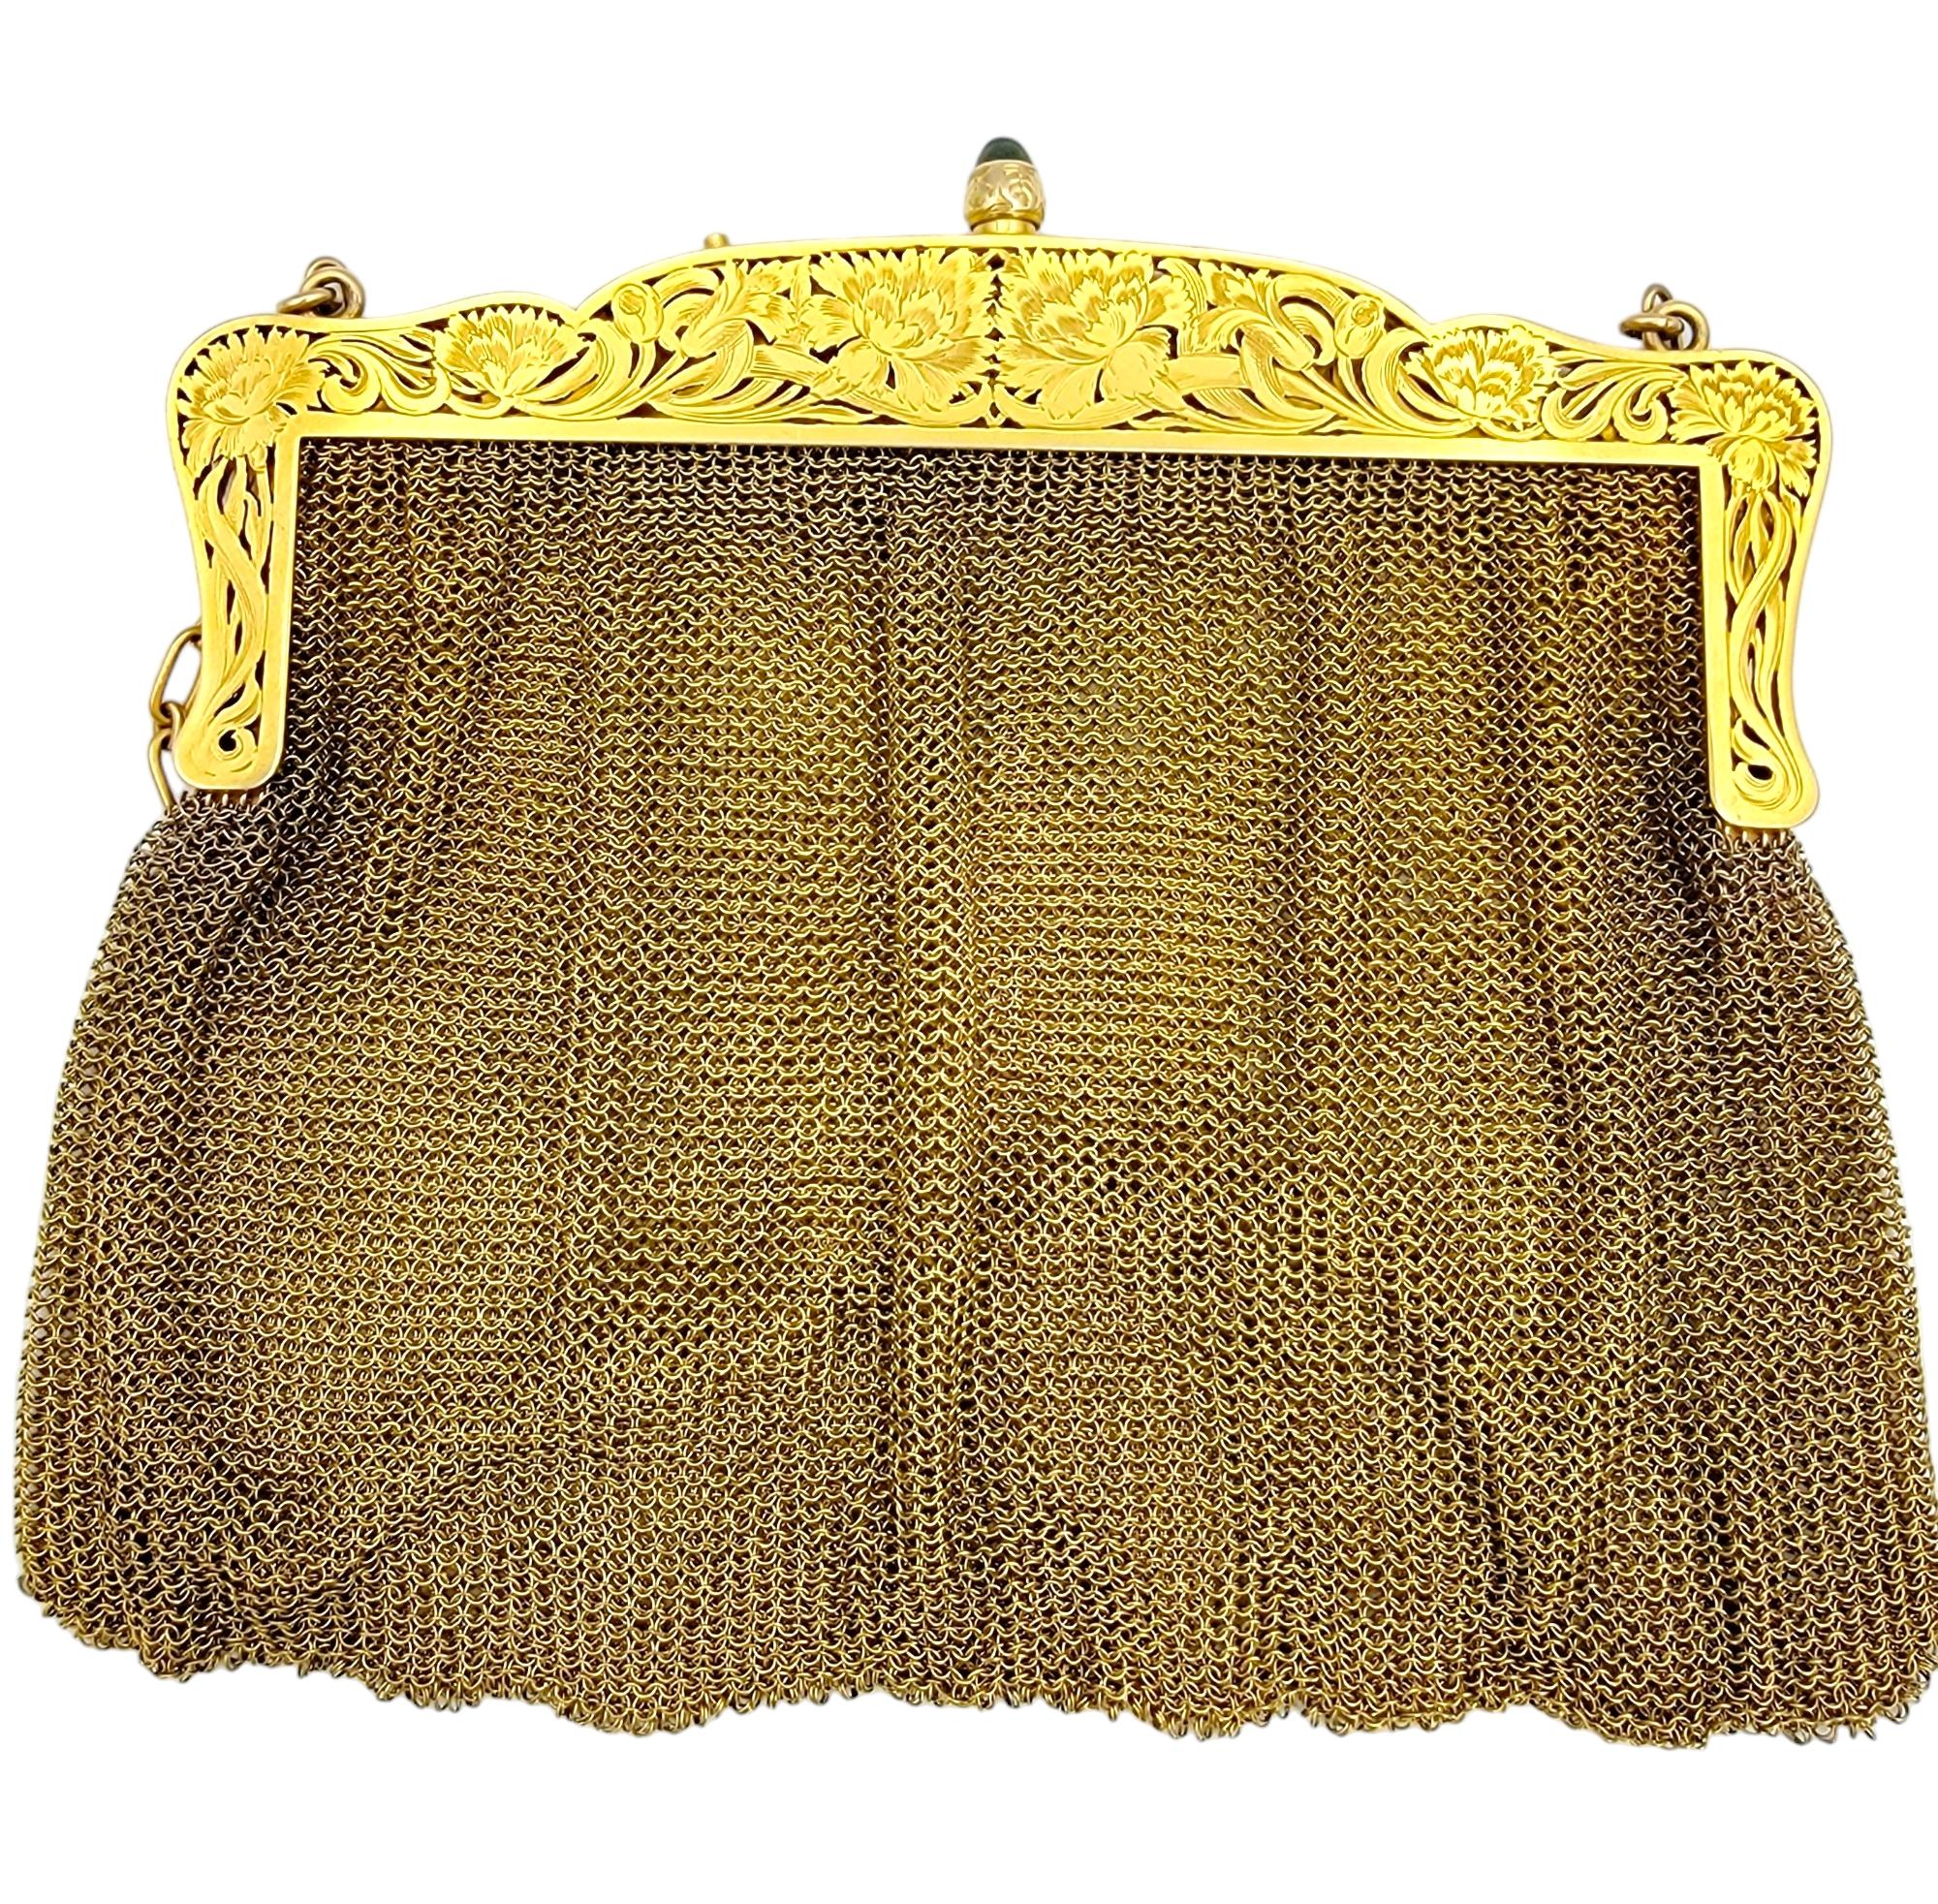 Exquisite 14 karat yellow gold flapper purse. This gorgeous and unique Art Deco piece is composed of delicate woven 14 karat yellow gold mesh accented by a single grayish-blue sapphire cabochon at the kiss lock clasp. The top portion of the purse